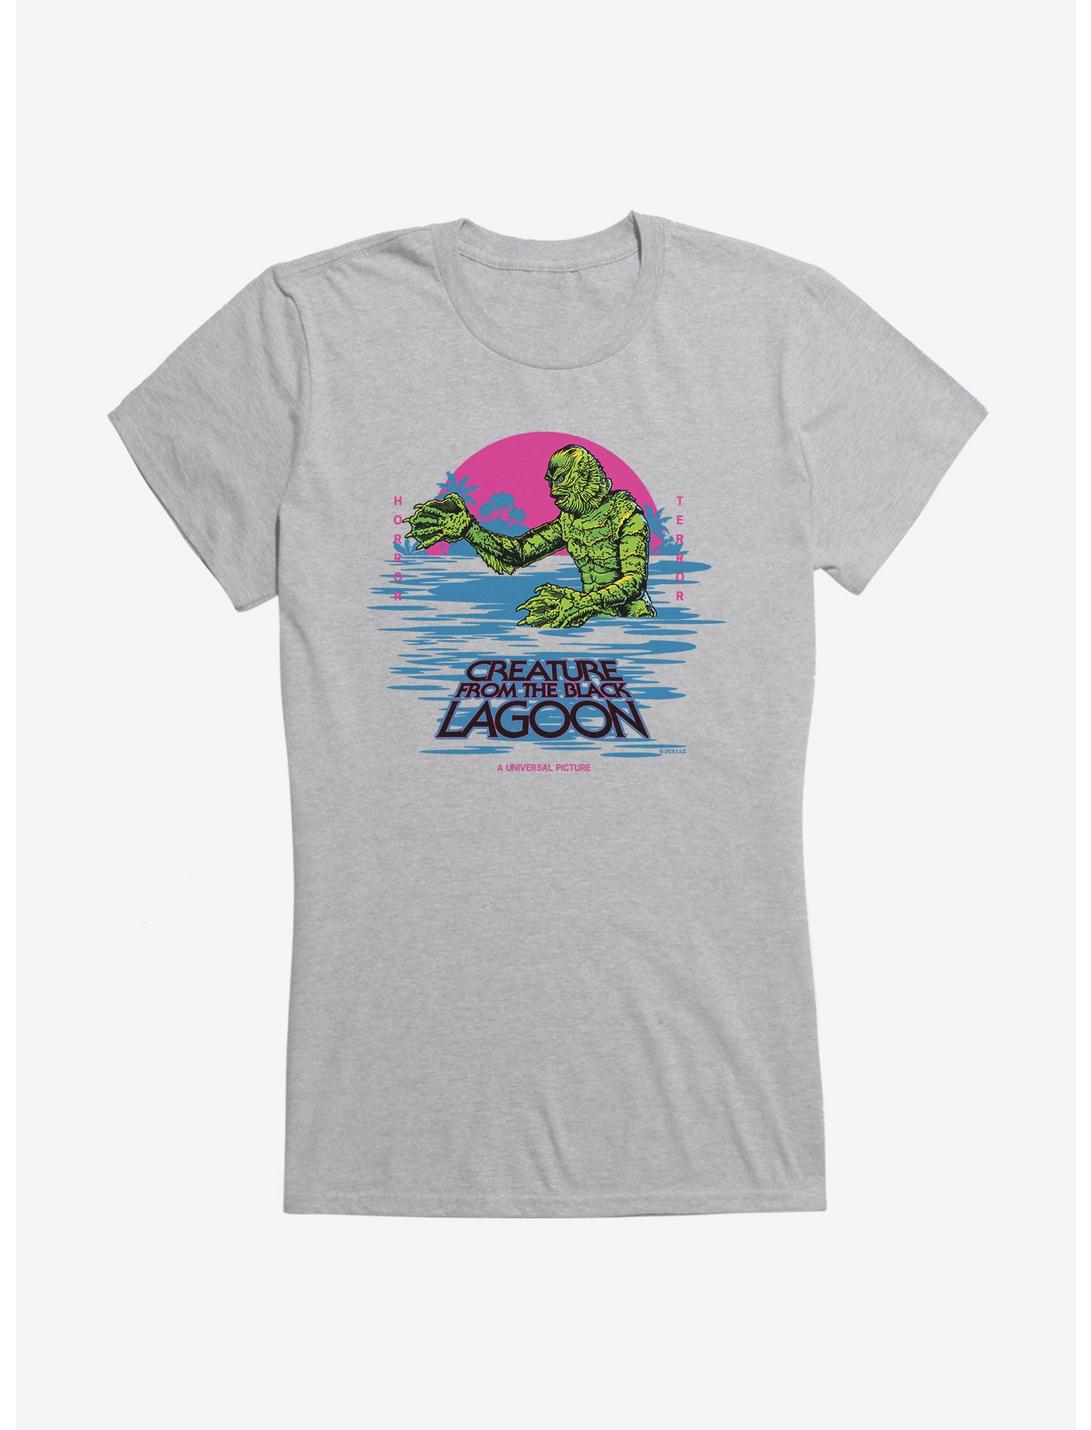 Creature From The Black Lagoon Pastel Title Art Girls T-Shirt, HEATHER, hi-res